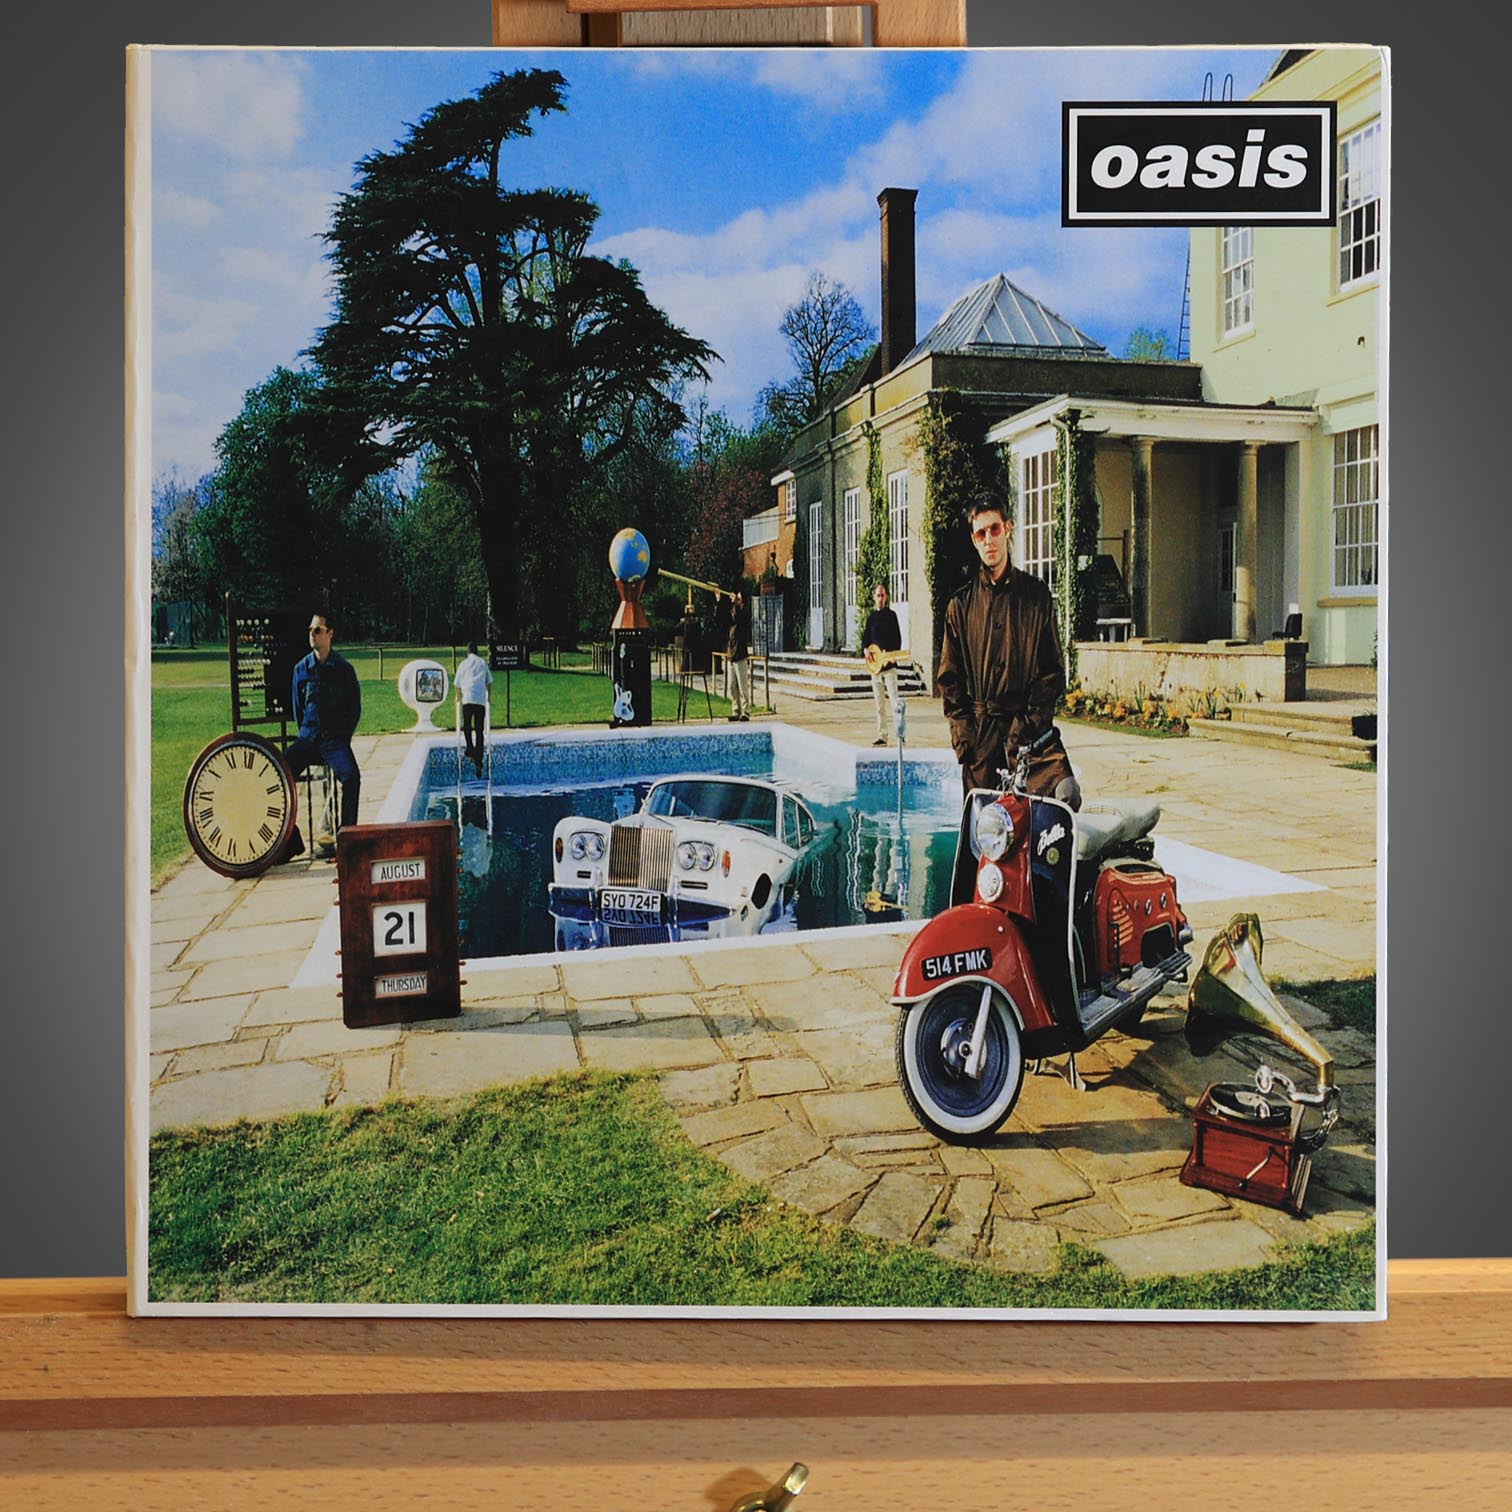 Oasis - Be Here Now - Fanclub Box Set CD - New Item